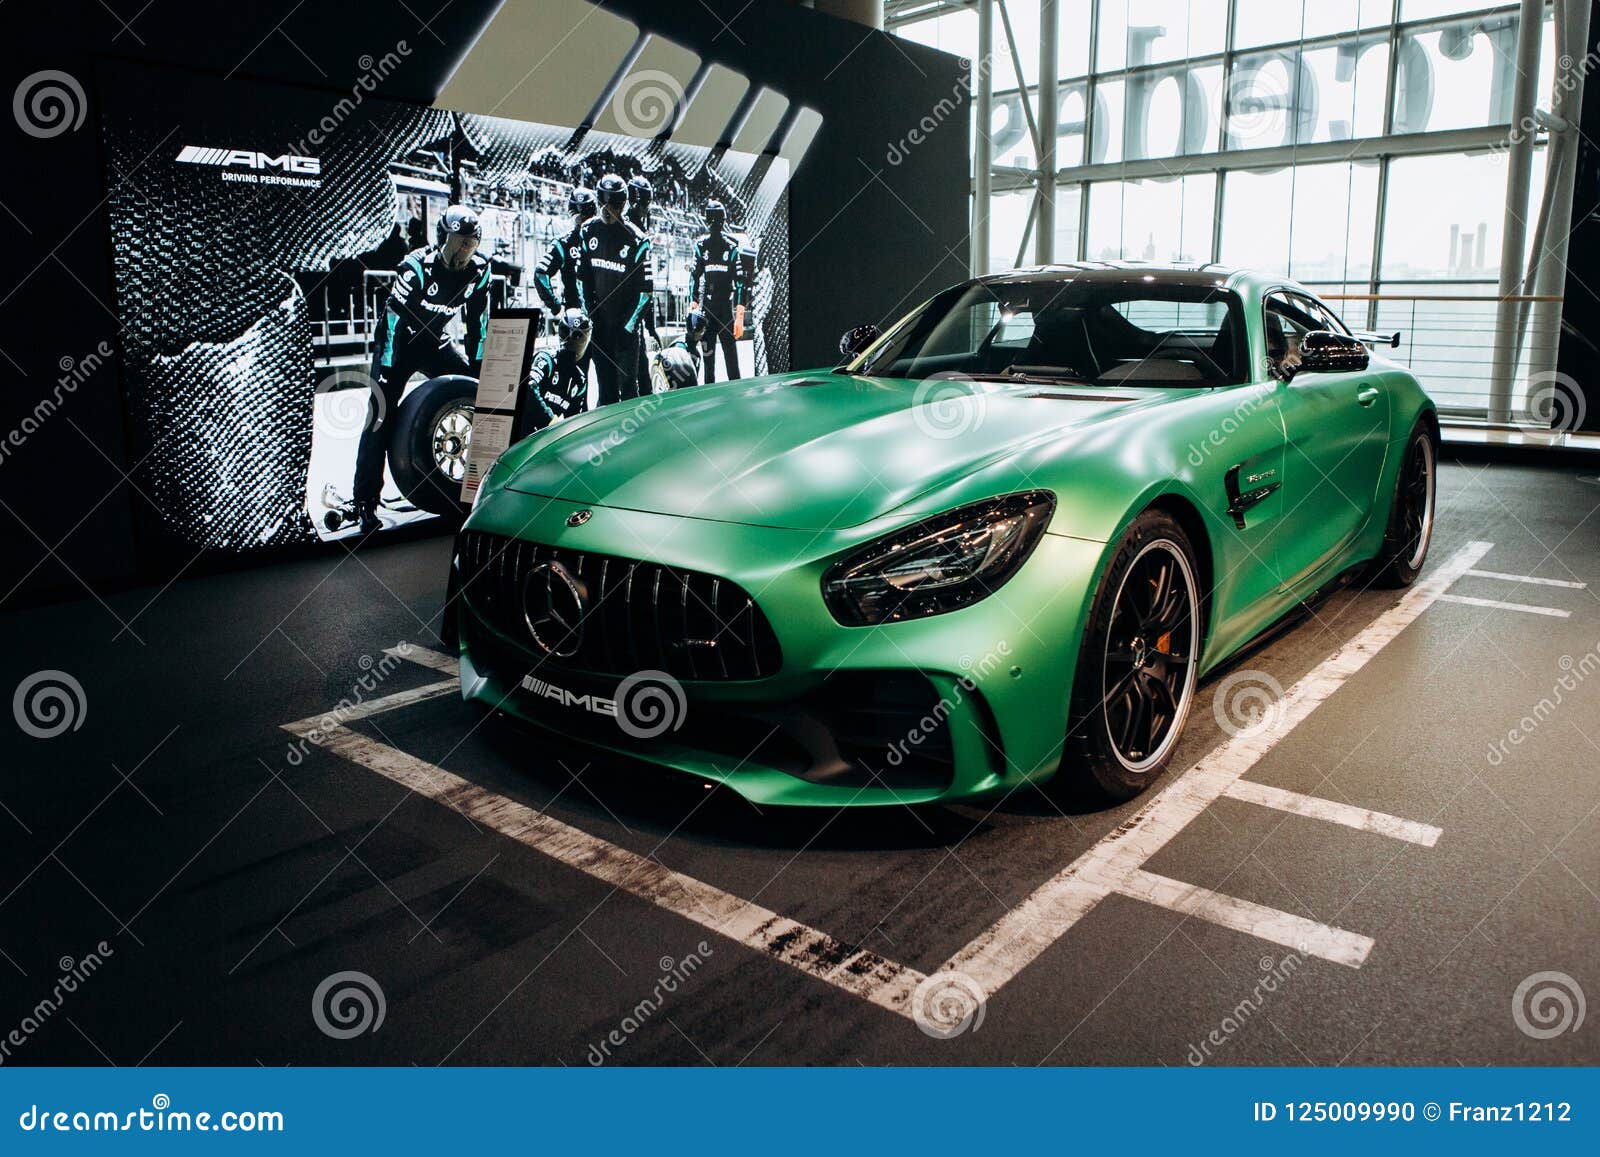 The New Sporty Modern Mercedes Benz Amg Gt Turbo V8 Editorial Image Image Of Dealership Mercedesbenz 125009990